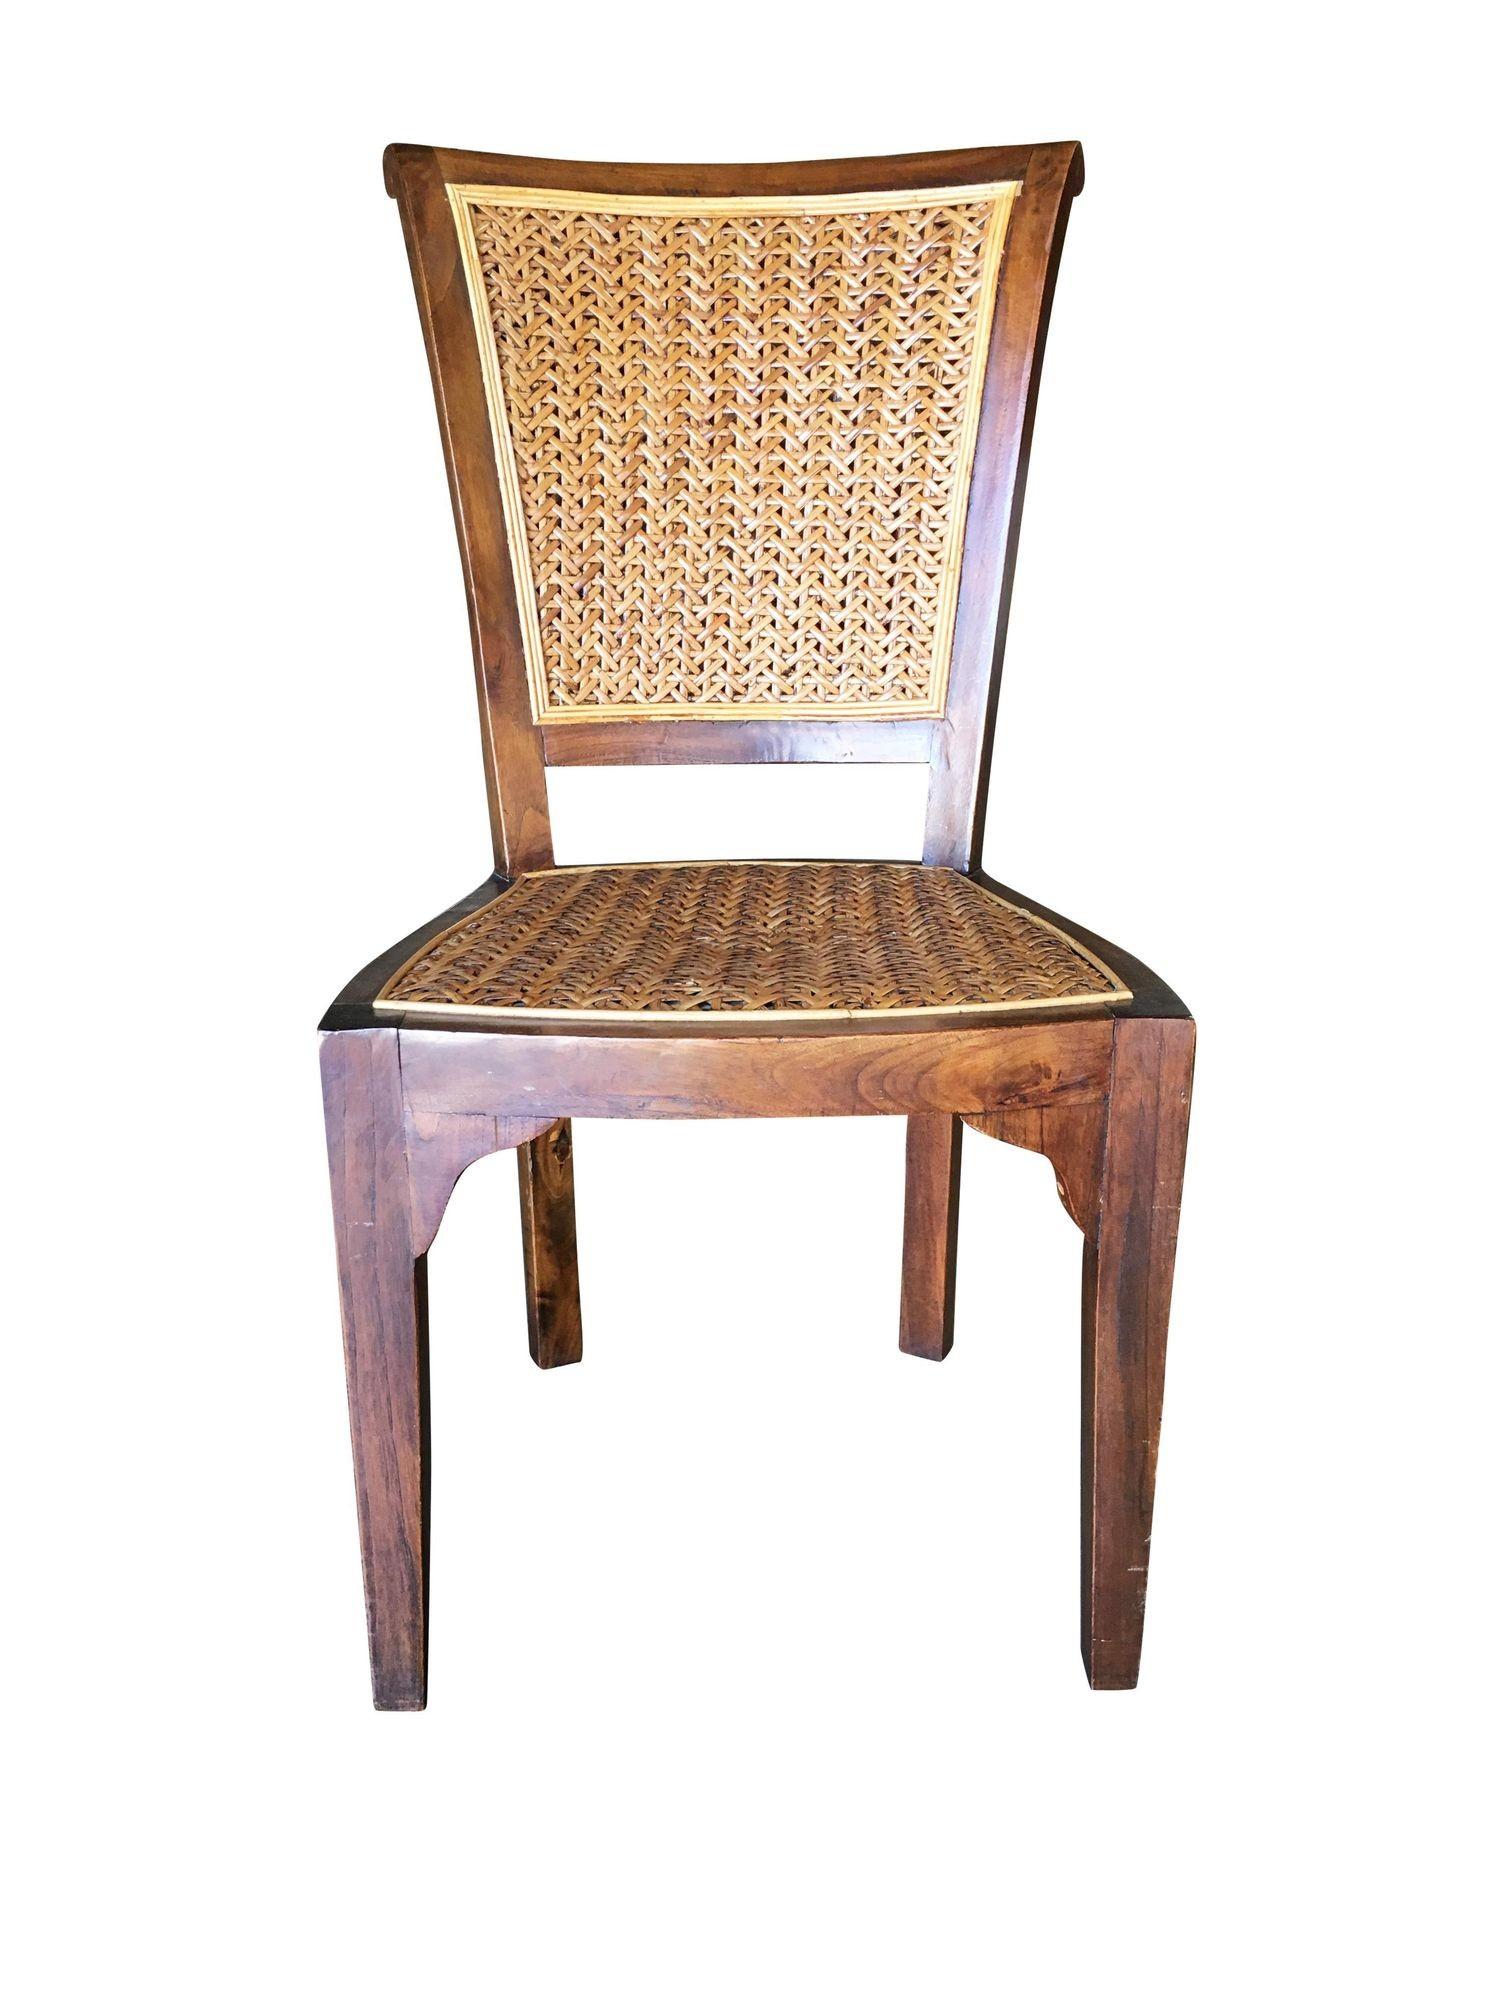 High style midcentury mahogany formal dining chair with woven wicker seat.